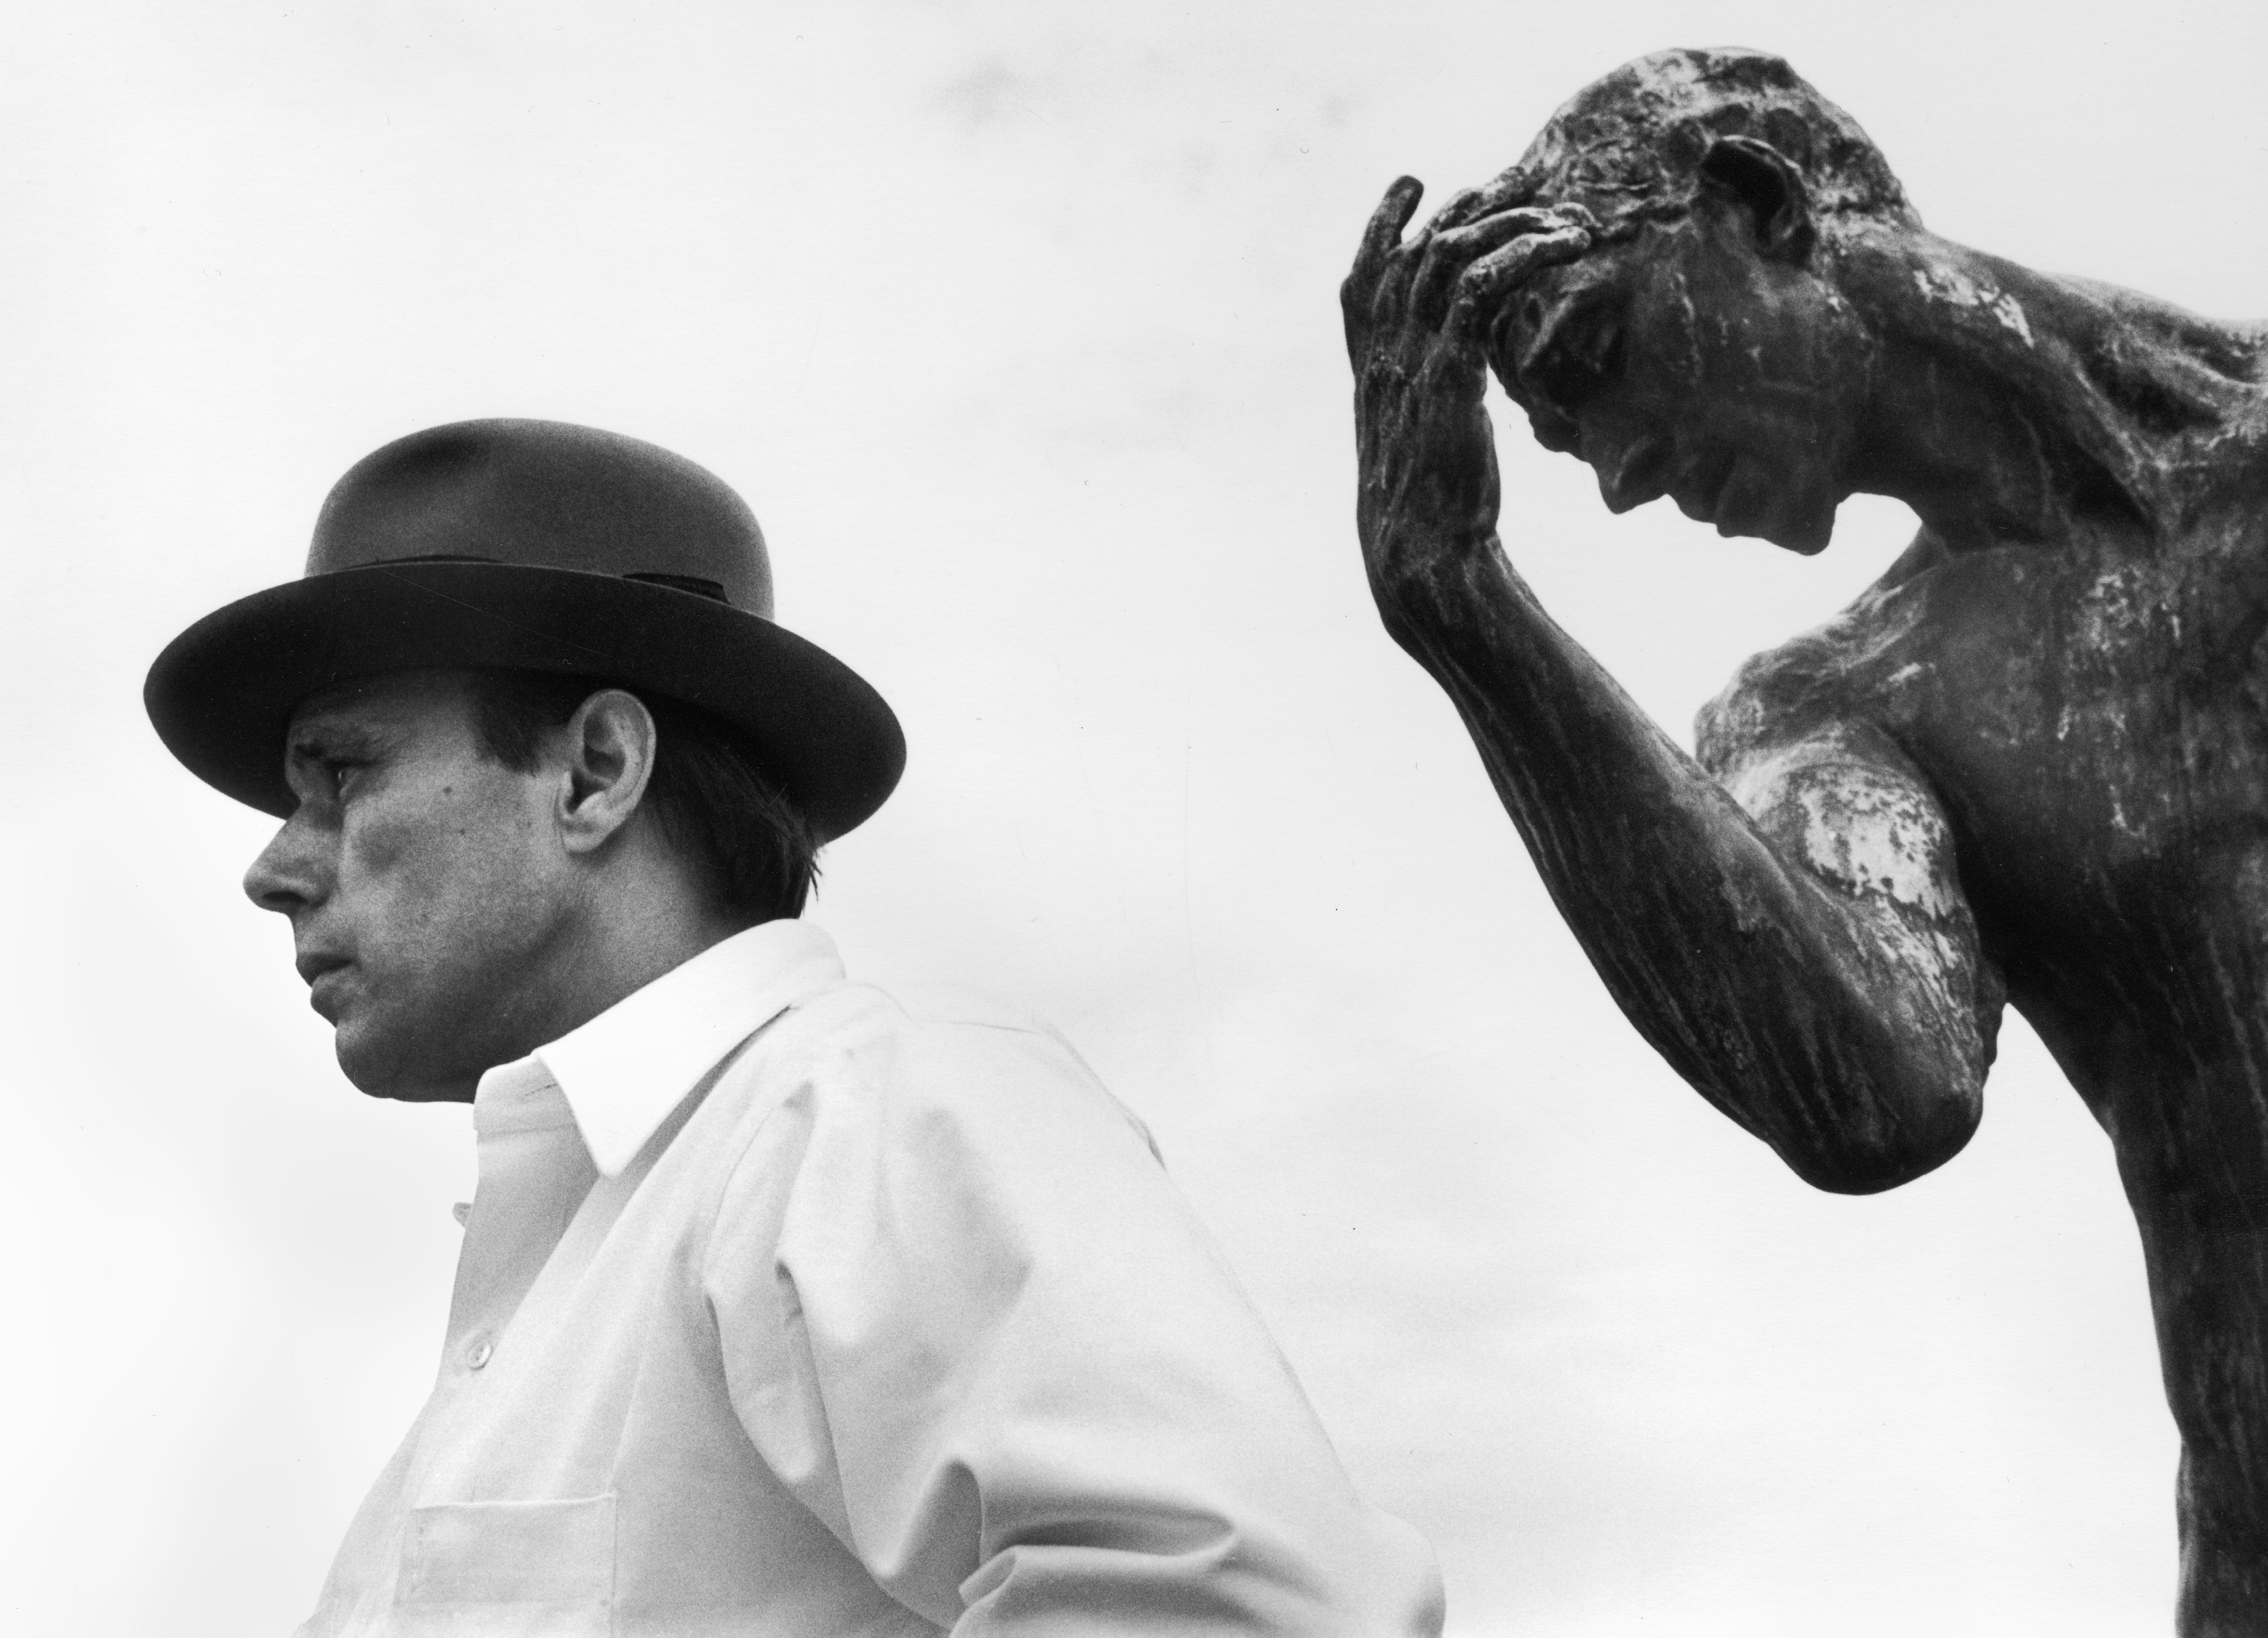 For Joseph Beuys, art could be anything